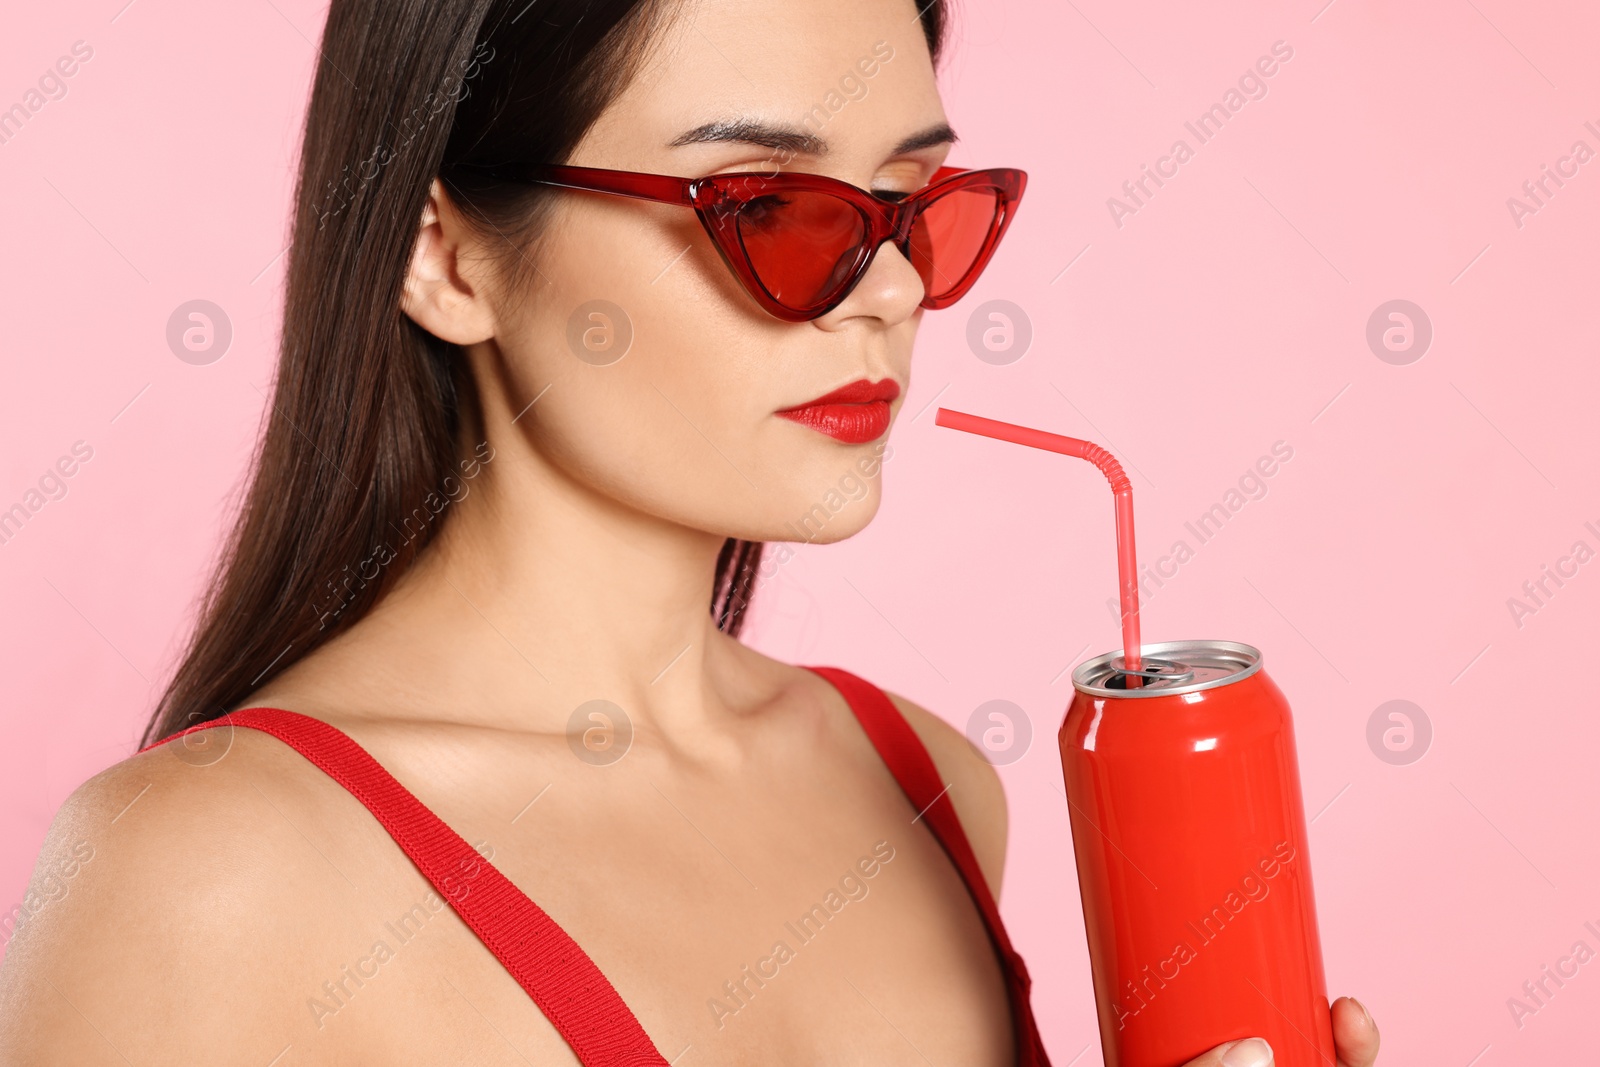 Photo of Beautiful young woman with stylish sunglasses drinking from tin can on pink background